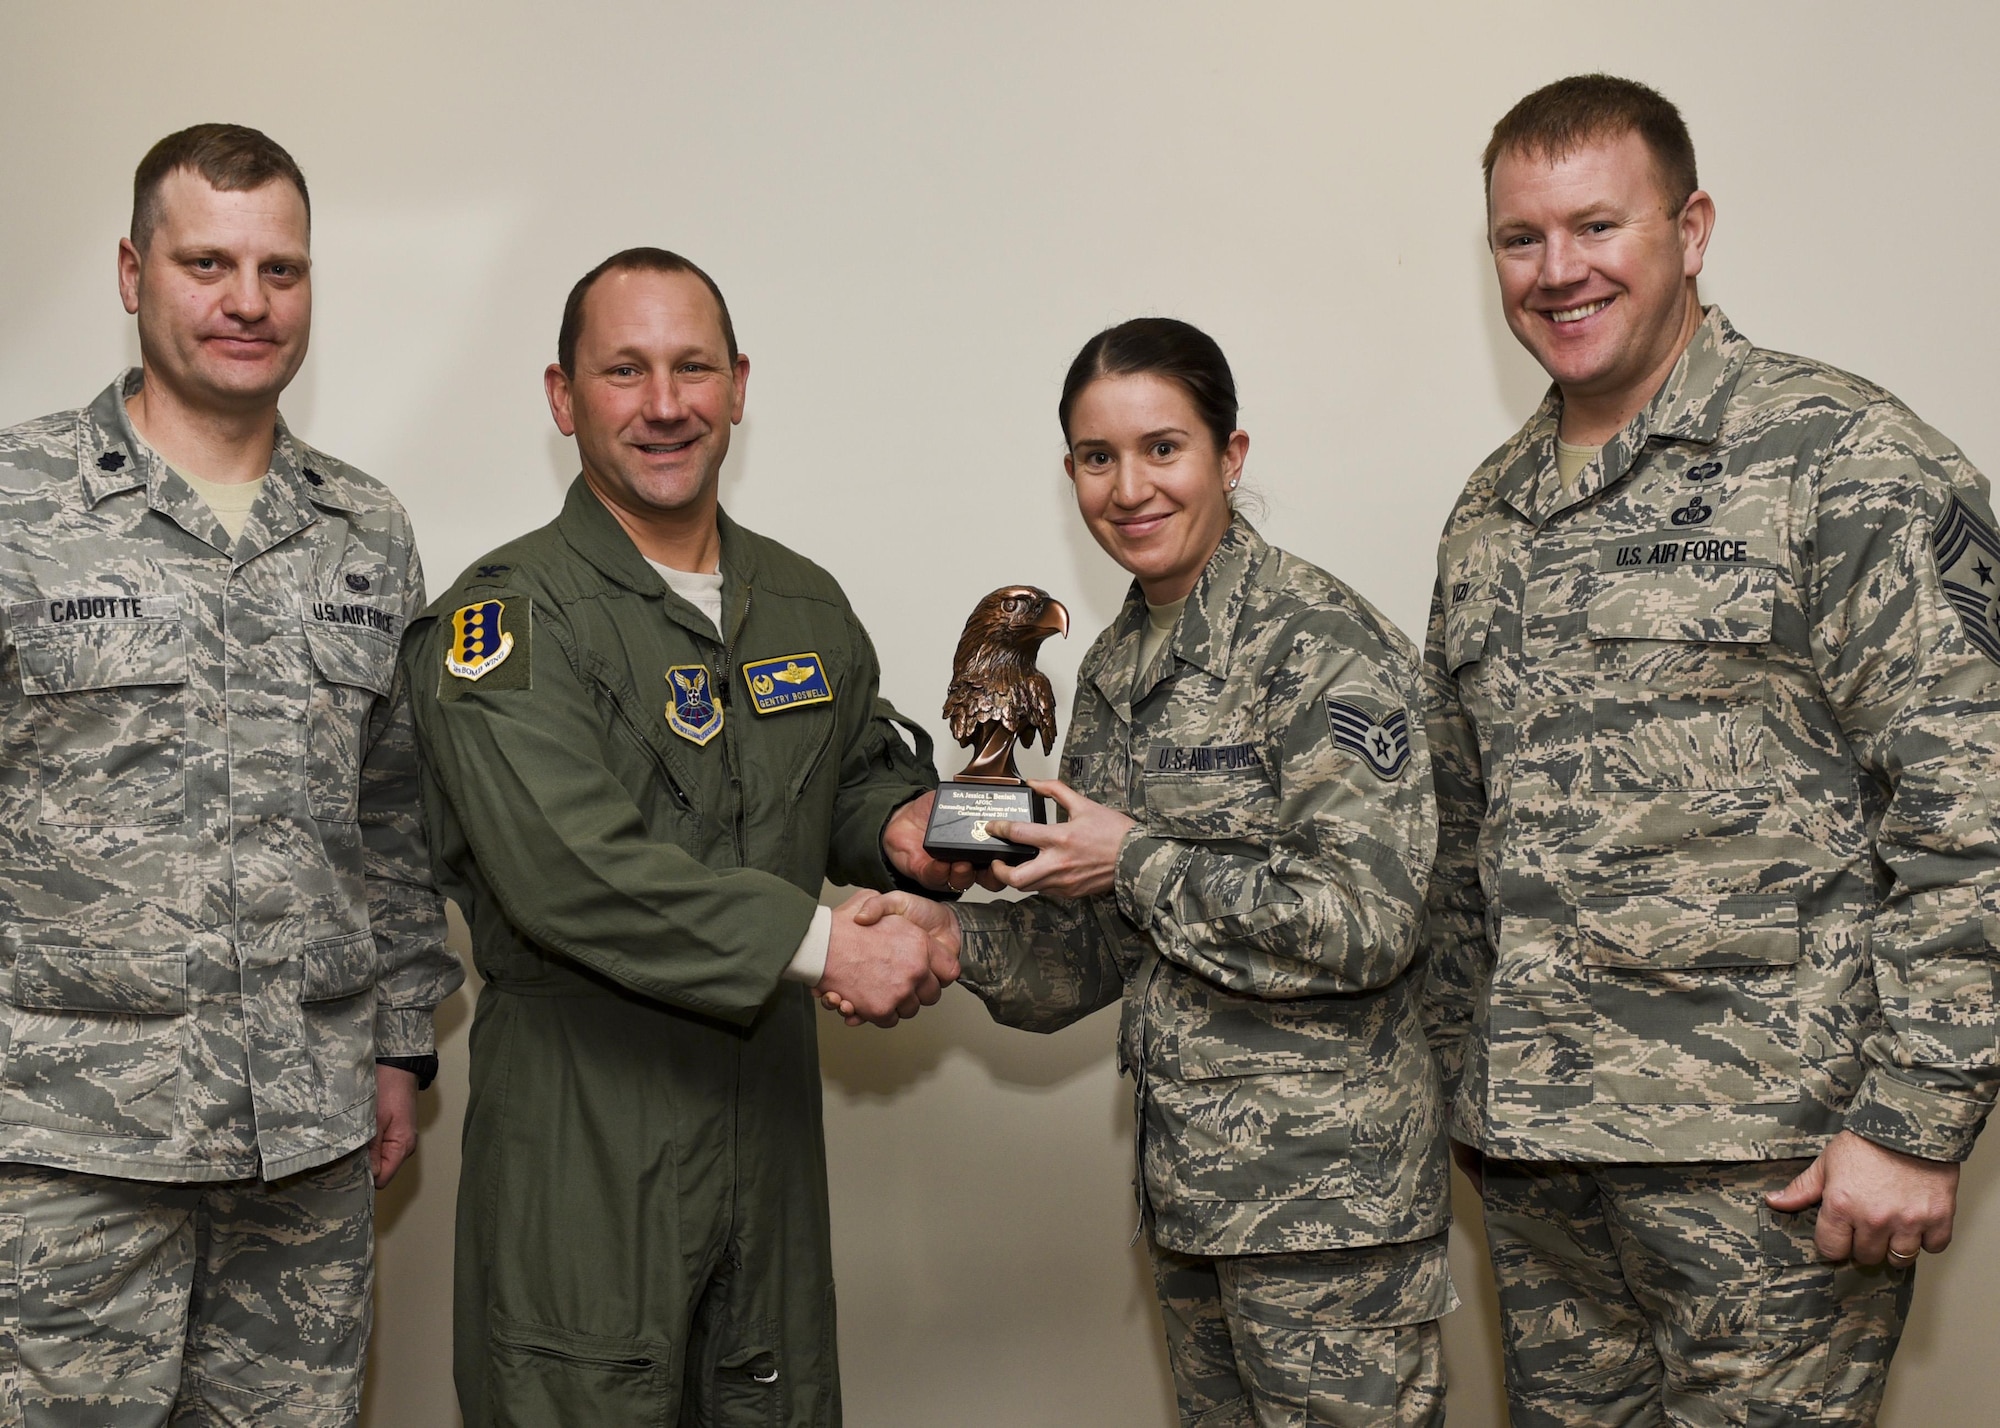 Col. Gentry Boswell, the 28th Bomb Wing commander, presents Staff Sgt. Jessica Benisch, a paralegal assigned to the 28th Bomb Wing Legal Office, with the Castleman Award, on Jan. 12, 2017, at Ellsworth Air Force Base, S.D. The award recognizes her as the most outstanding paralegal in Air Force Global Strike Command for 2015. (U.S. Air Force photo by Airman 1st Class Randahl J. Jenson)